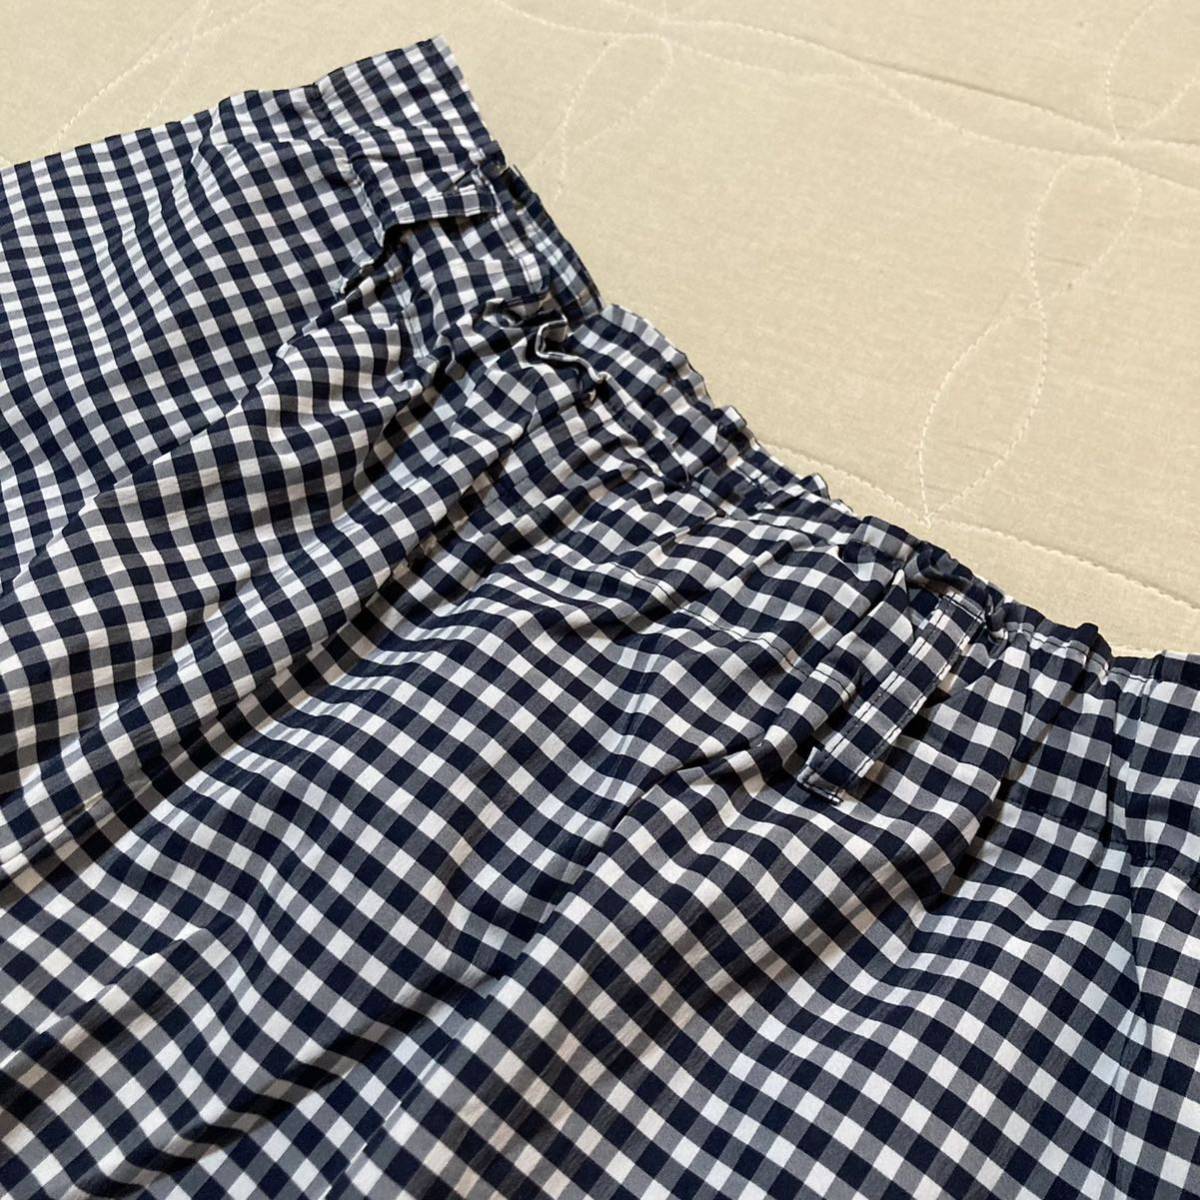 1068* Leilian 11* ultimate beautiful goods * silver chewing gum check. wide gaucho pants * navy * thin * size 11